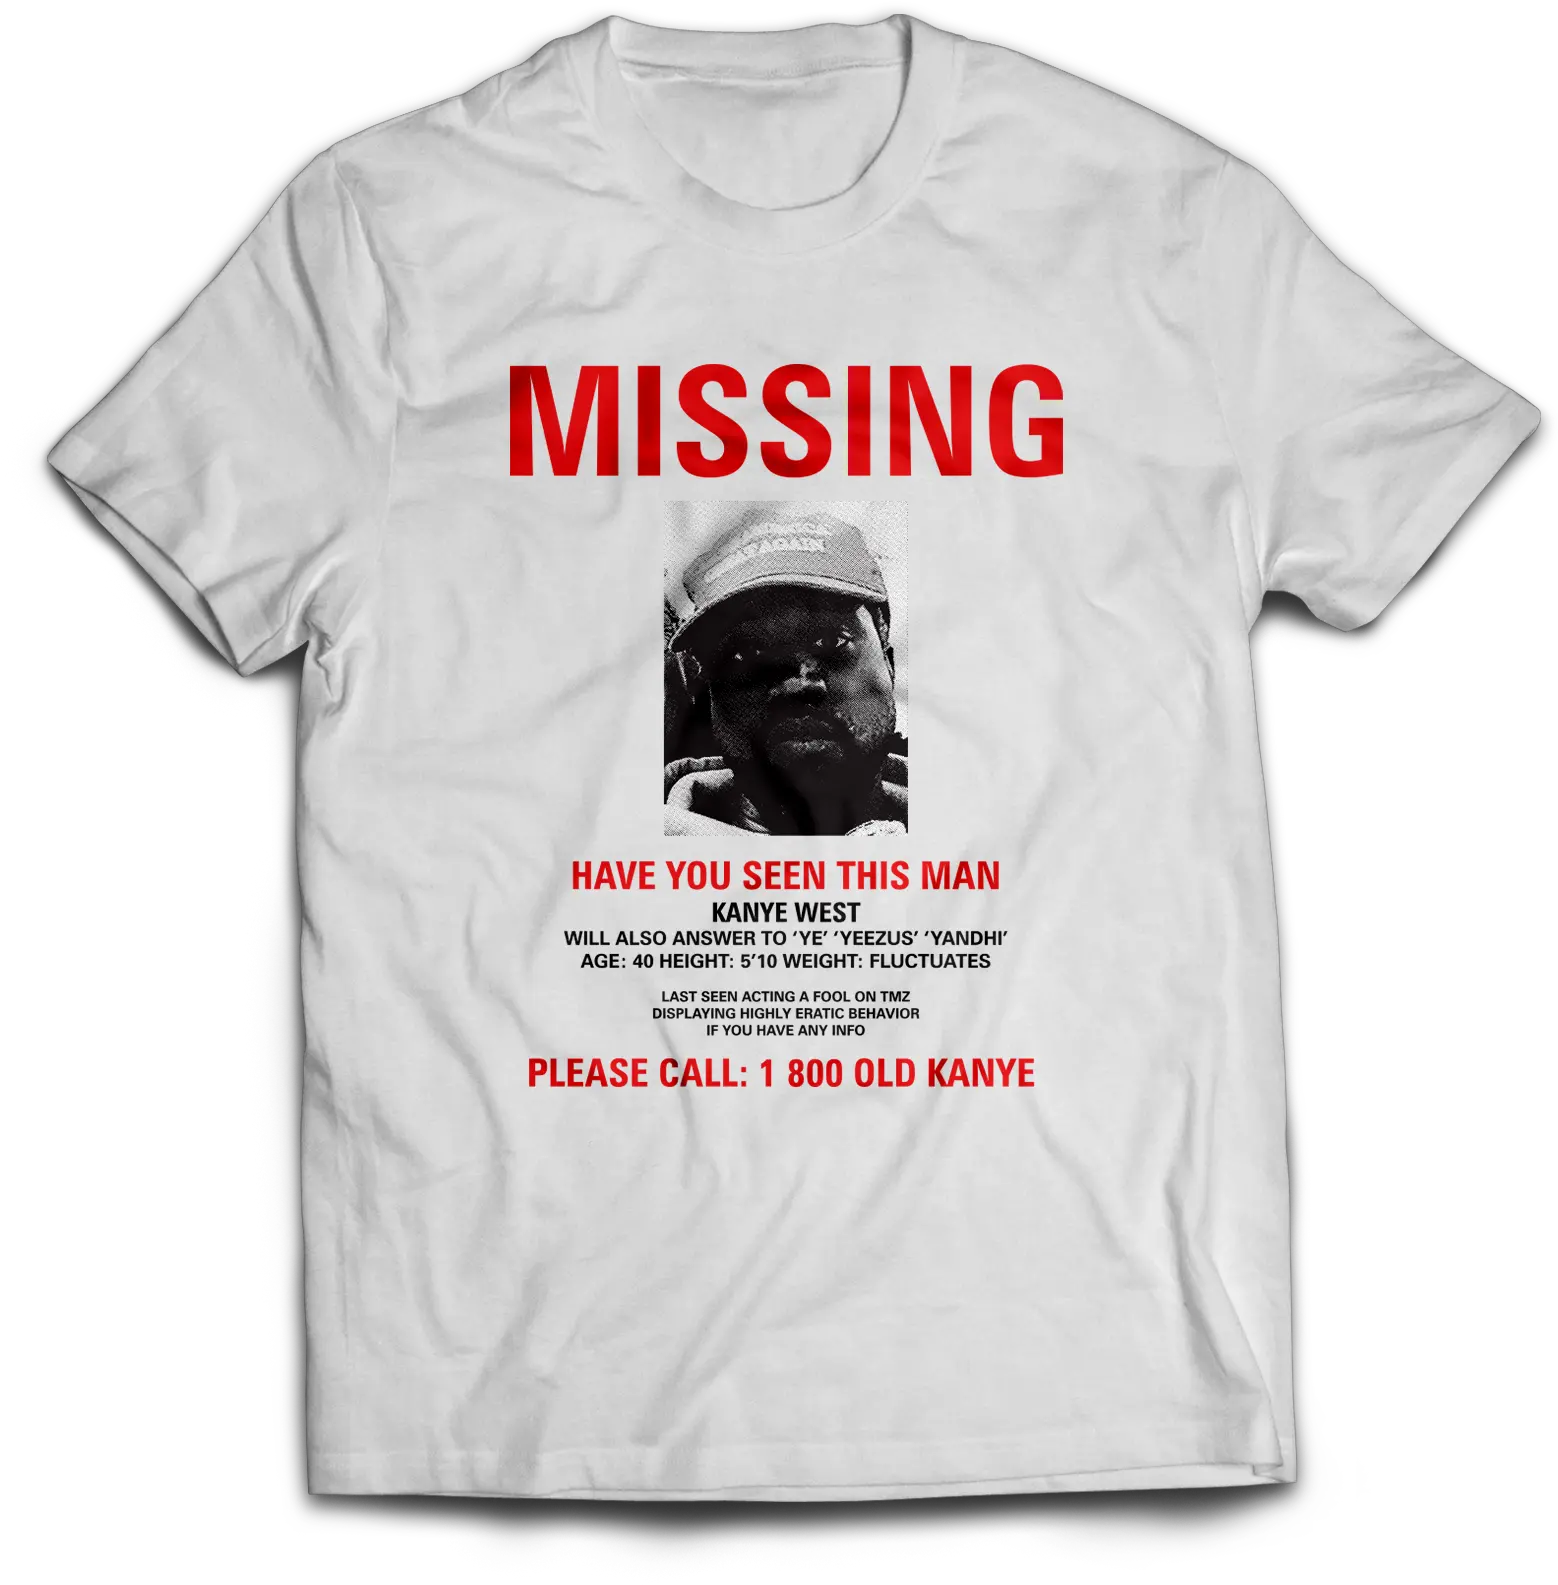 Download 1 800 Old Kanye Pray For The Wicked Tour Shirts Mba T Shirts Qoutes Png Kanye Face Png